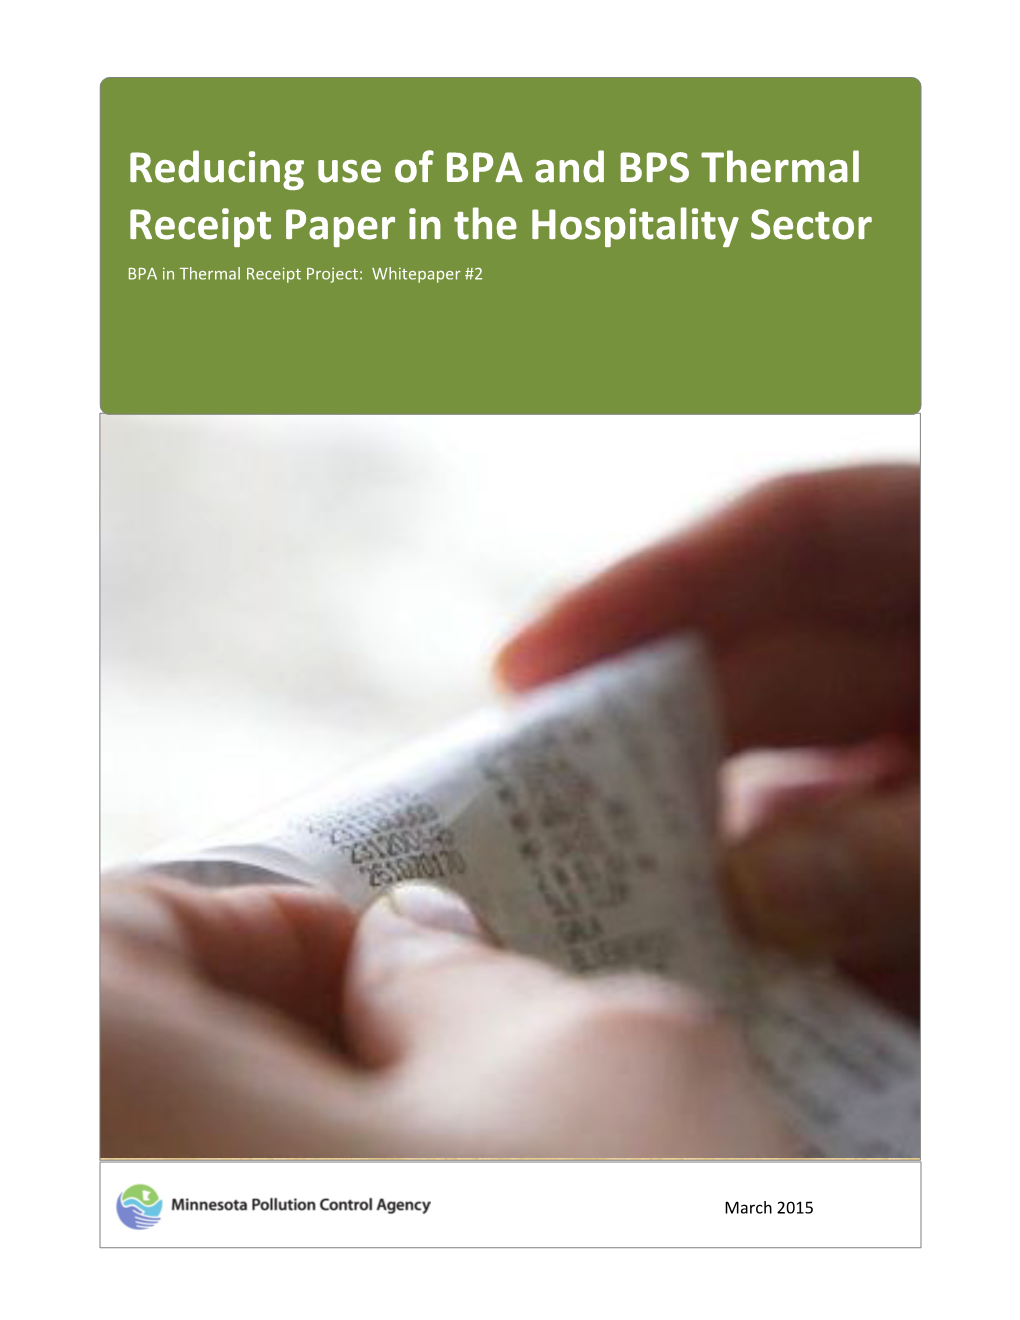 Reducing Use of BPA and BPS Thermal Receipt Paper in the Hospitality Sector BPA in Thermal Receipt Project: Whitepaper #2